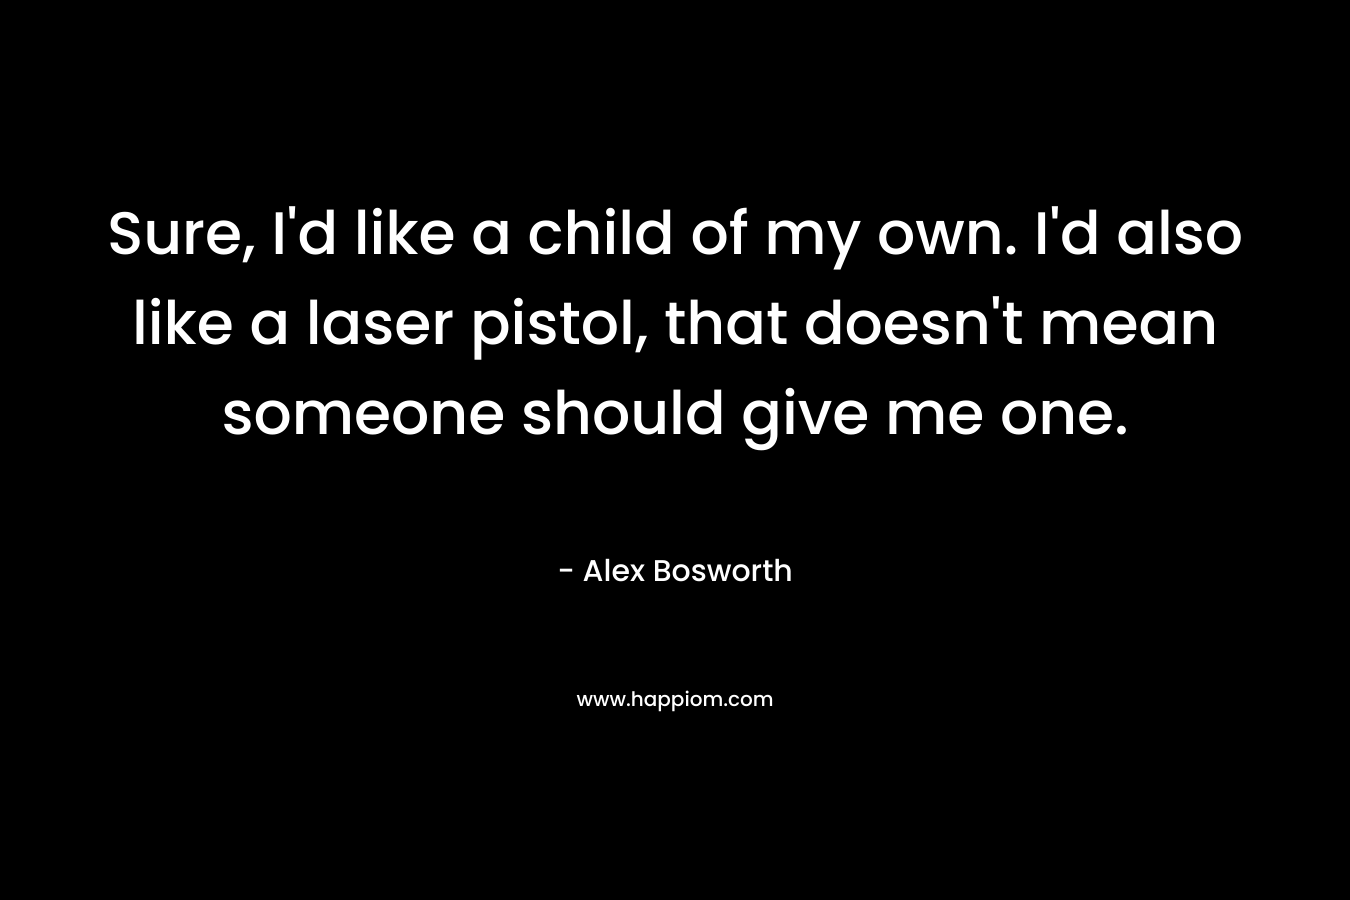 Sure, I'd like a child of my own. I'd also like a laser pistol, that doesn't mean someone should give me one.